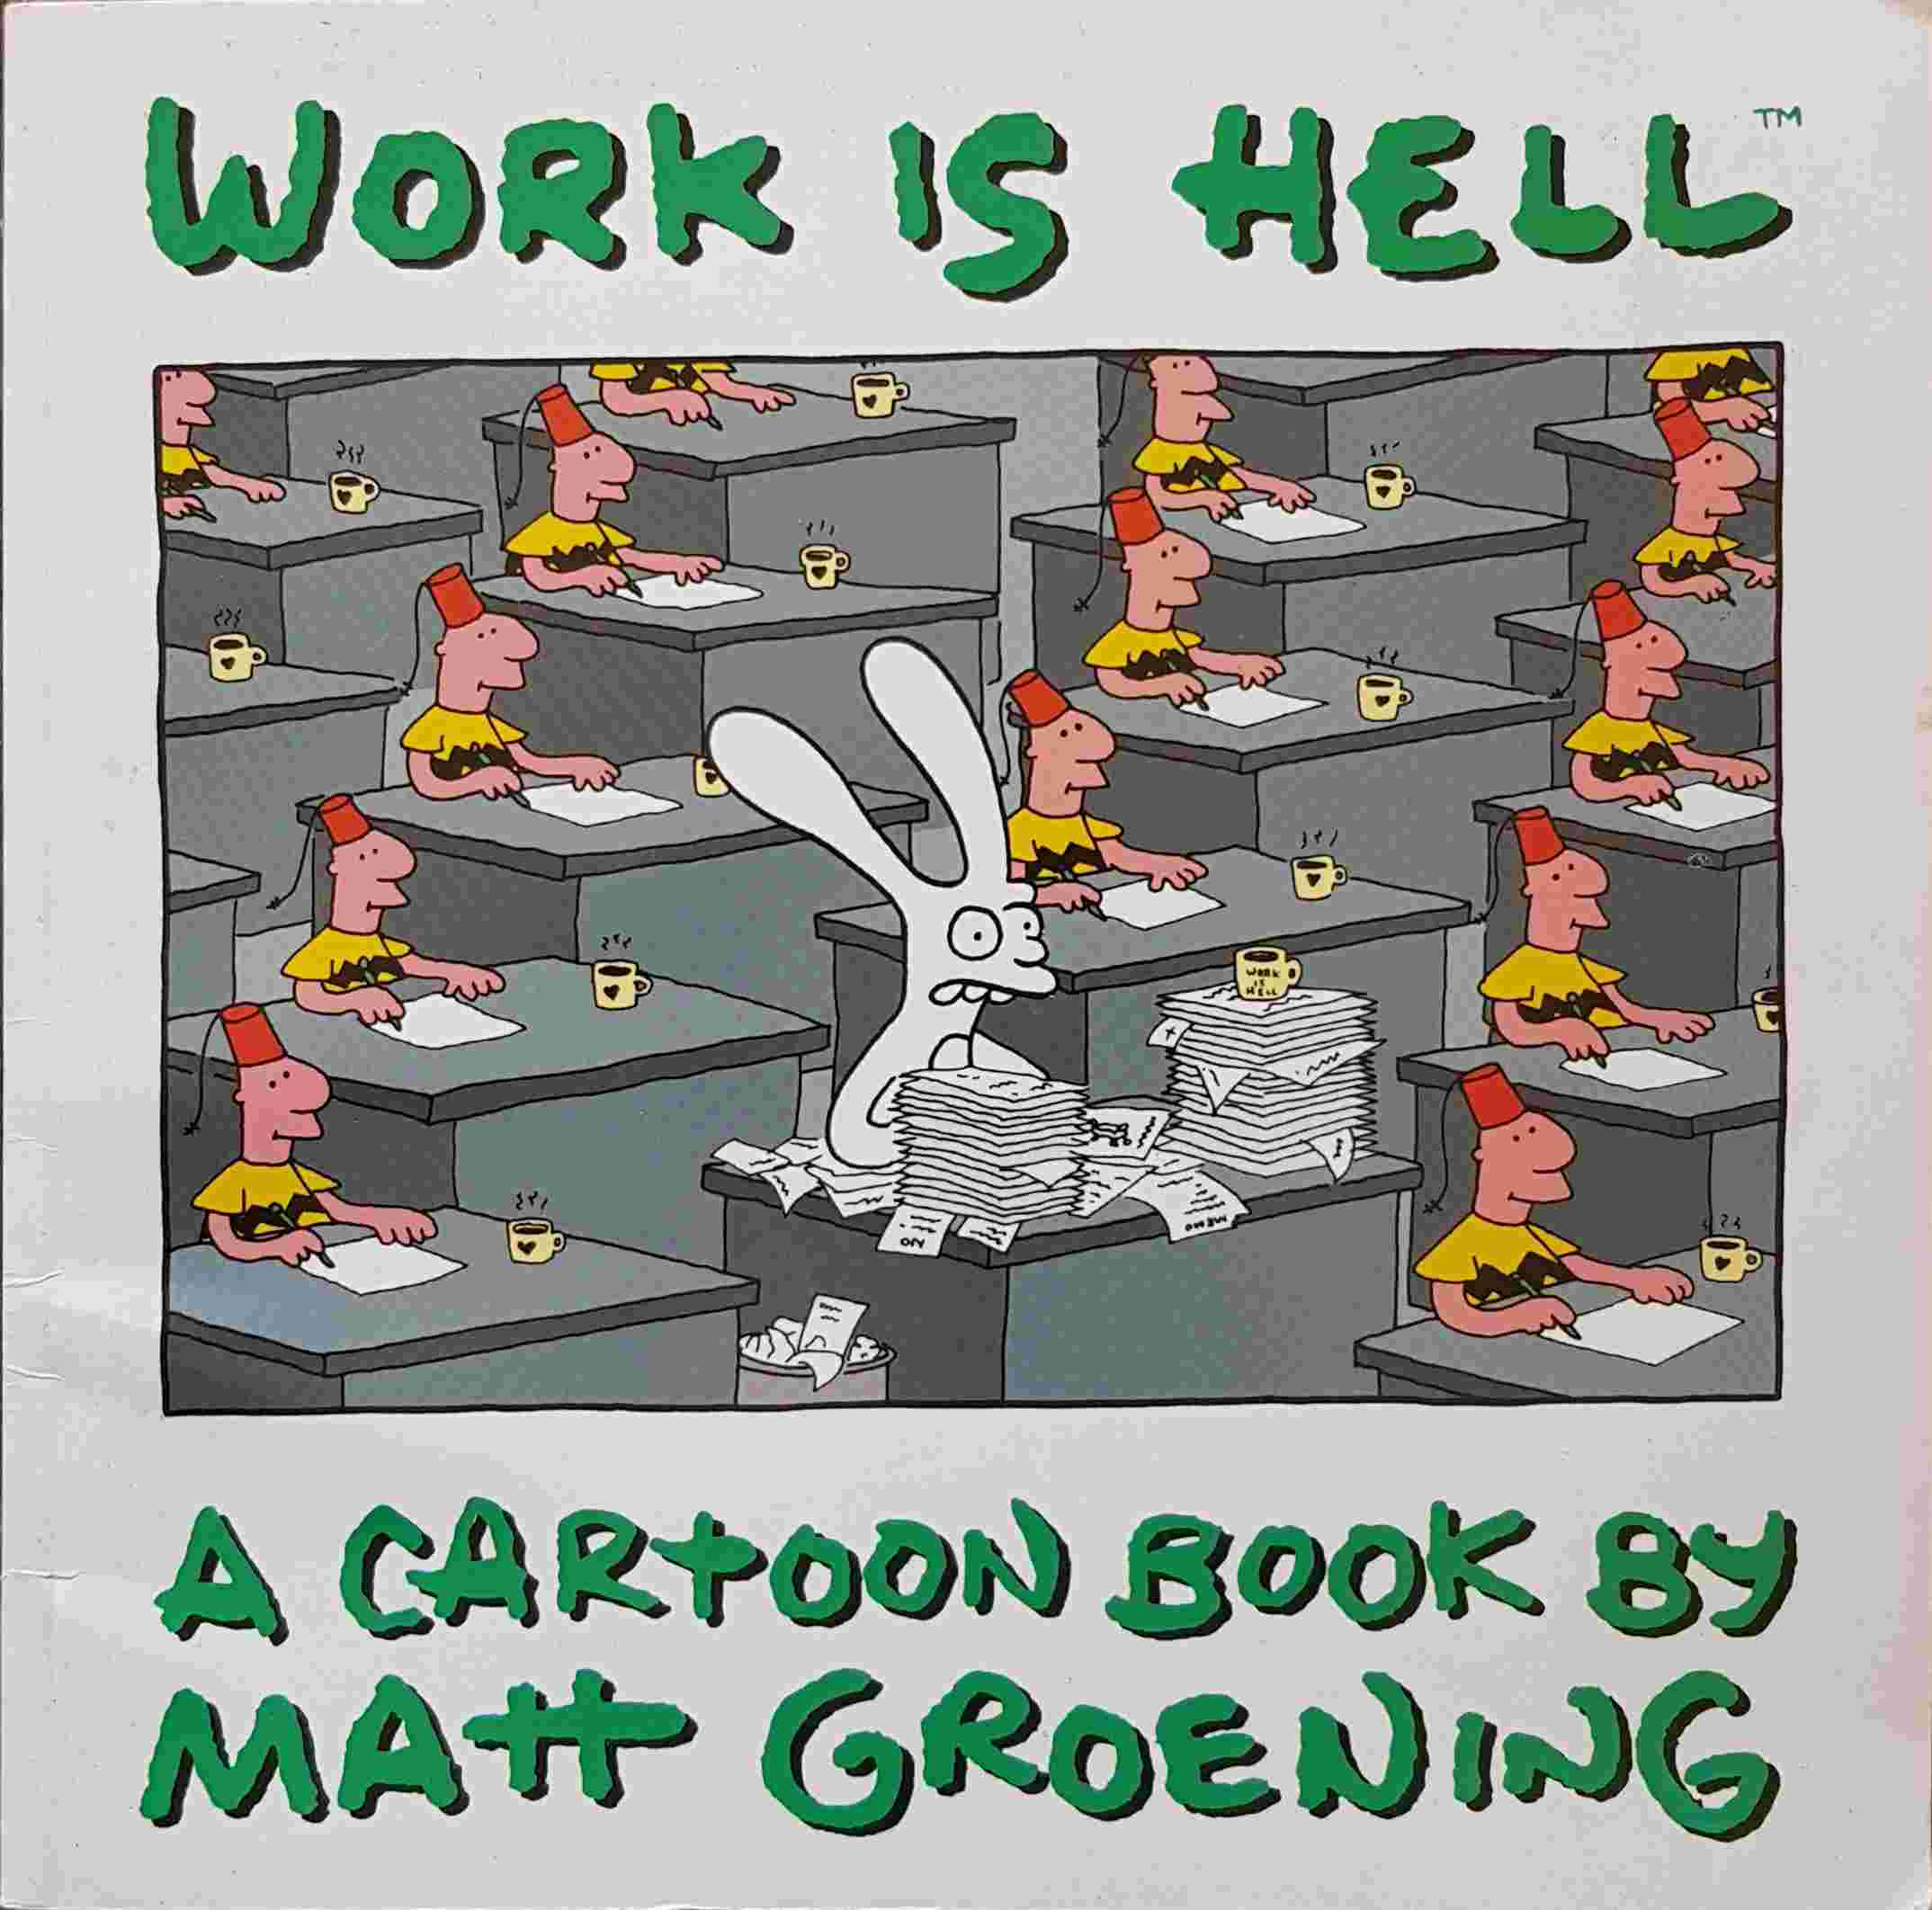 Picture of Work is hell by artist Matt Groening from ITV, Channel 4 and Channel 5 books library